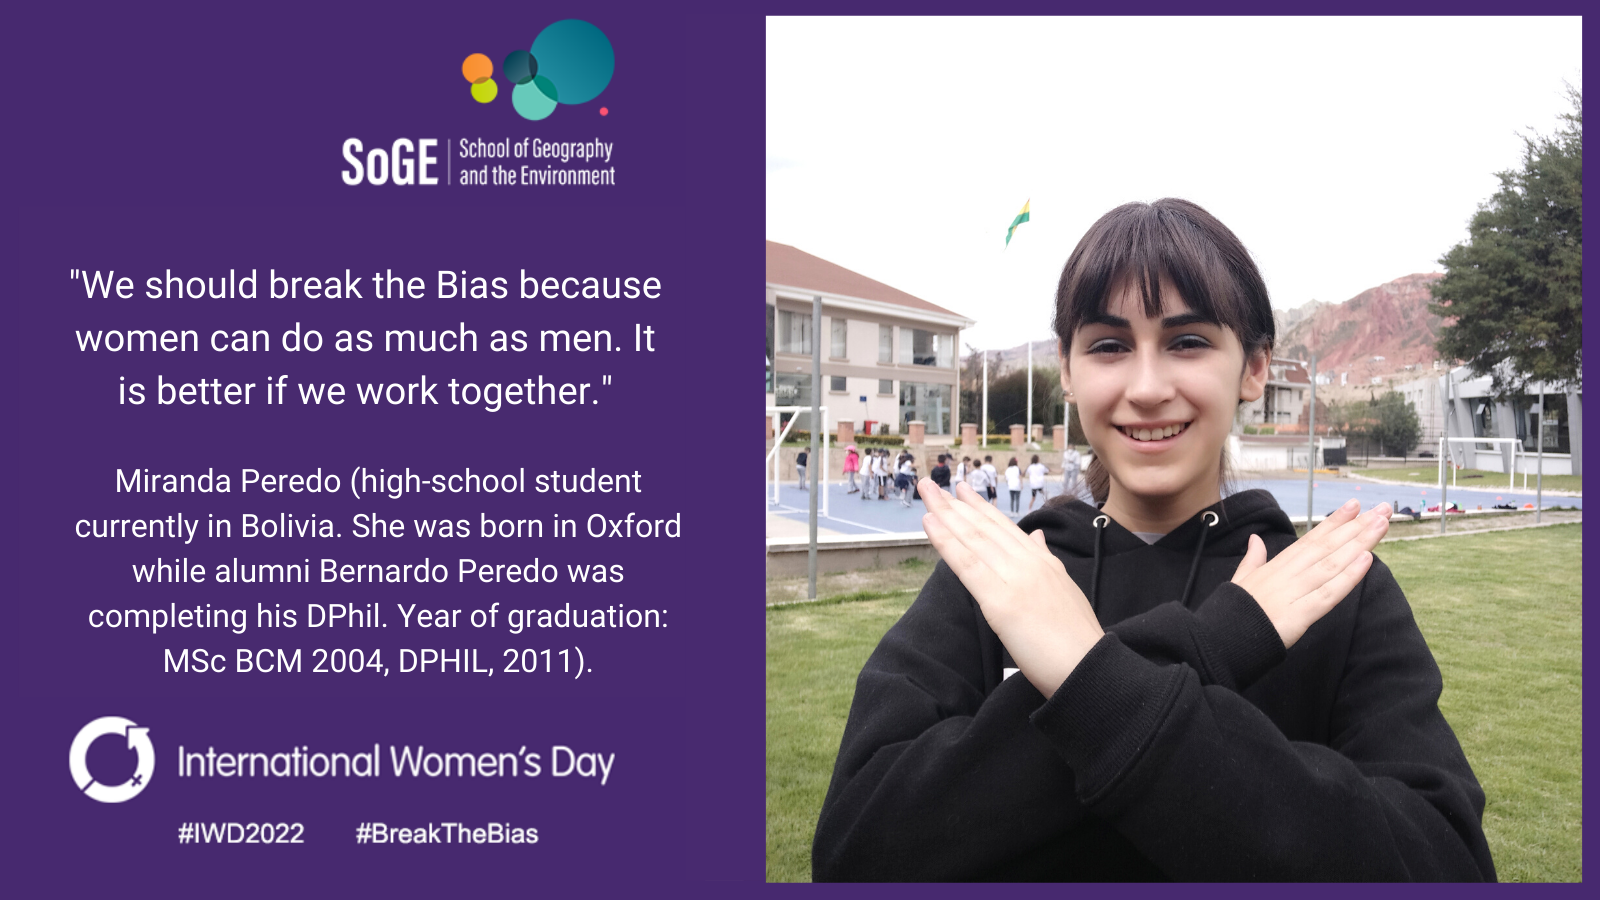 'We should break the Bias because women can do as much as men. It is better if we work together.' Miranda Peredo (high-school student currently in Bolivia. She was born in Oxford while alumni Bernardo Peredo was completing his DPhil. Year of graduation: MSc BCM 2004, DPHIL, 2011)